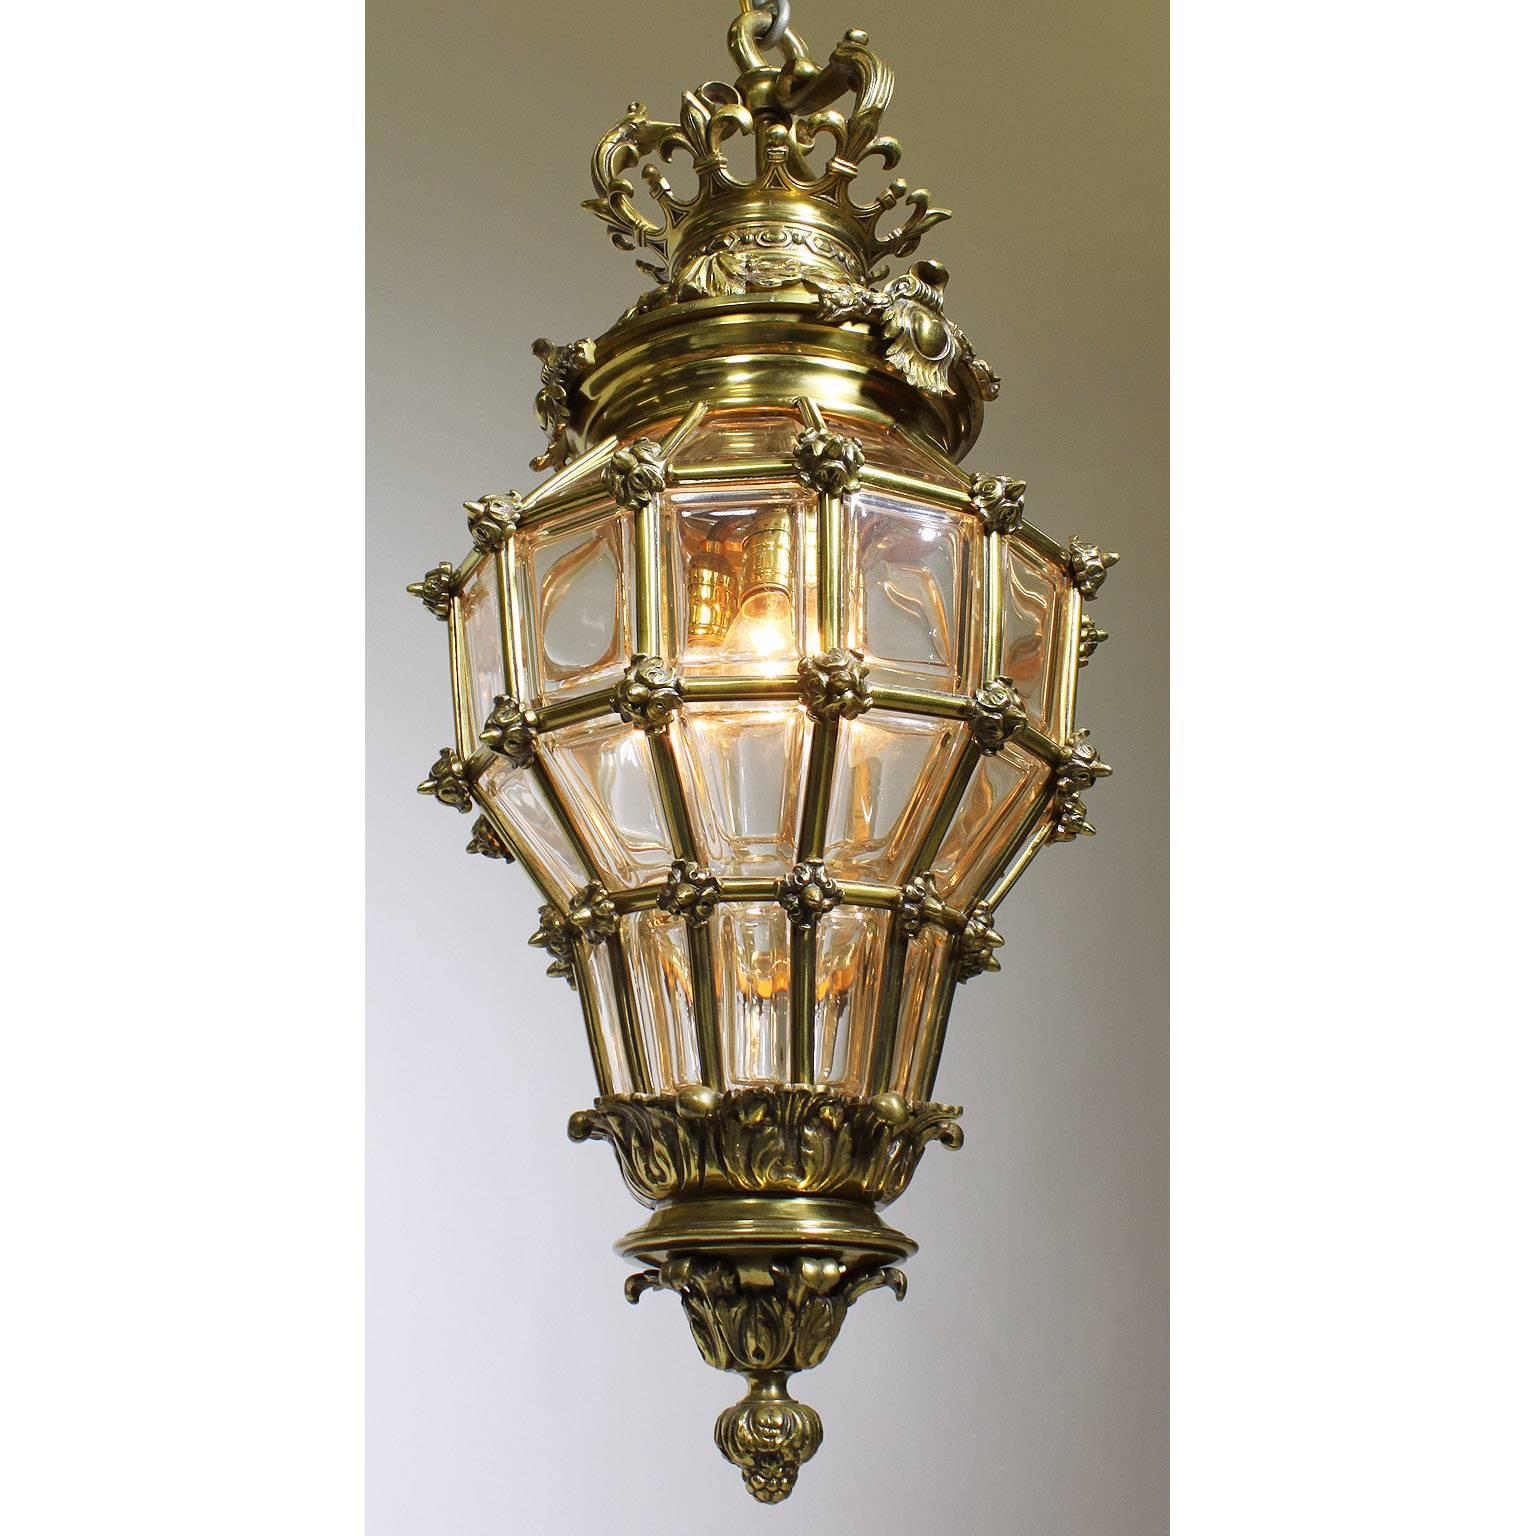 A French early 20th century Louis XIV style gilt bronze and molded glass 